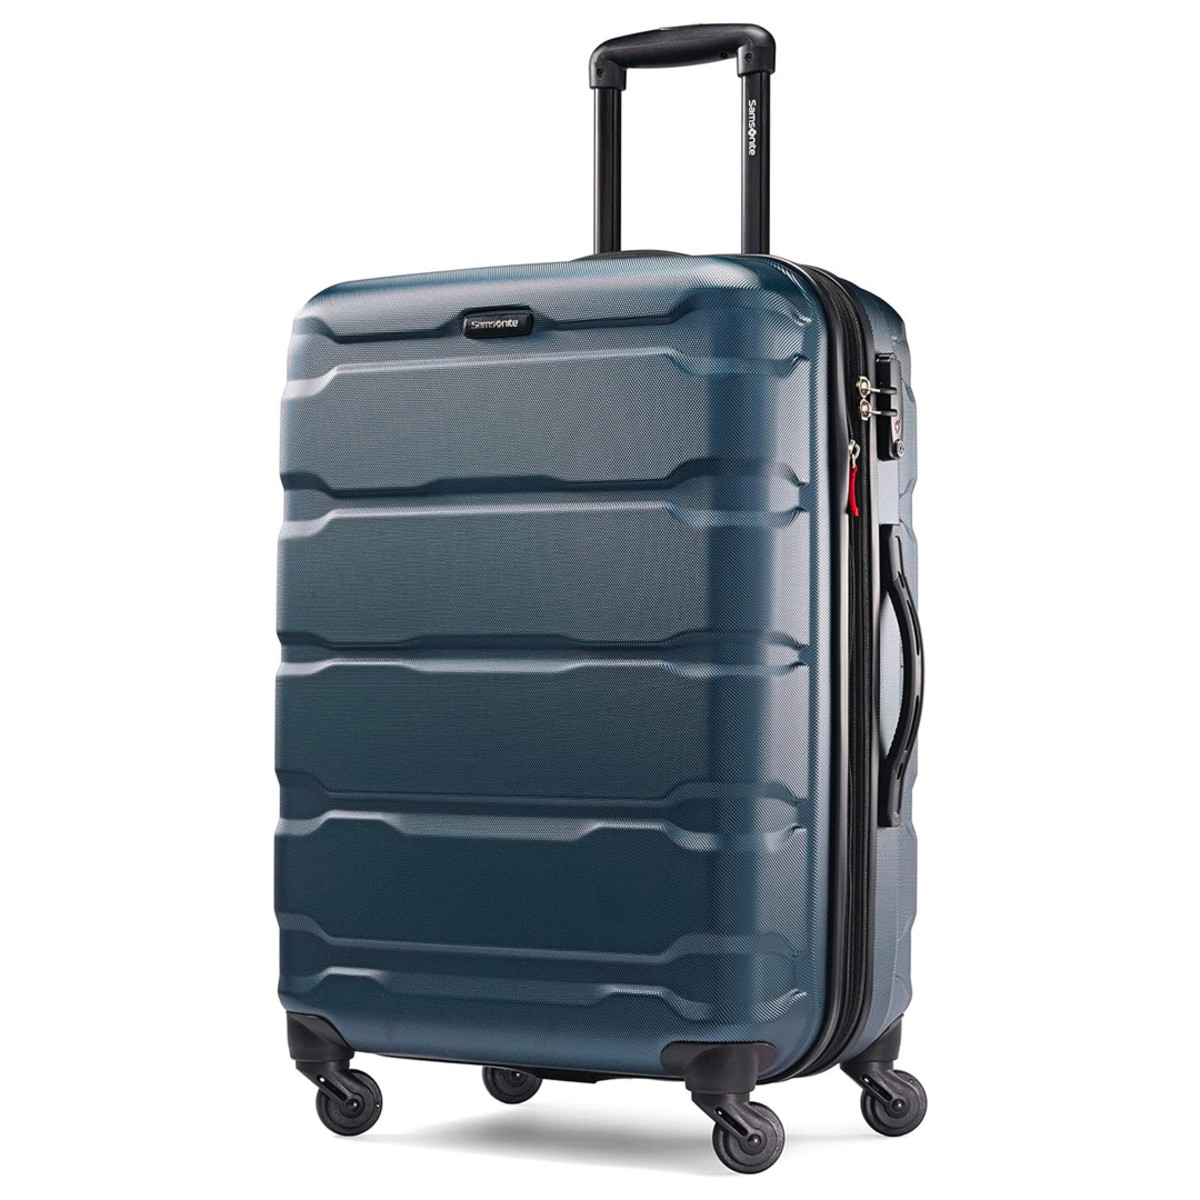 A Samsonite suitcase that can ‘fit so much’ is $67 off at Amazon ...